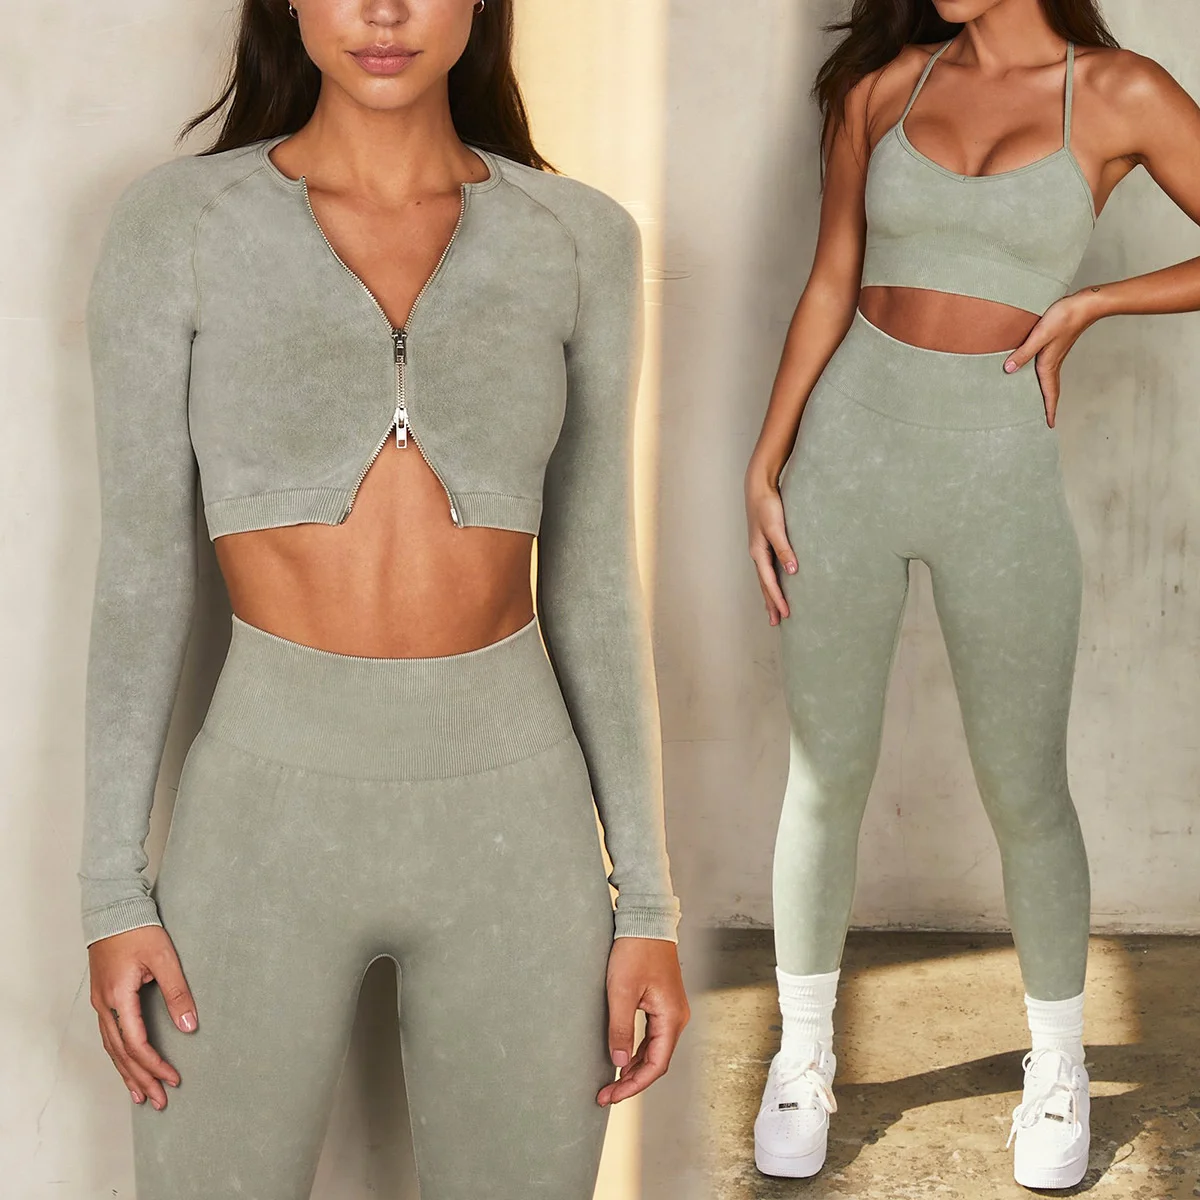 GymHUB New Sand Wash Seamless Yoga Suit Women's Suit Long Sleeve Sports Fitness Five Piece Set